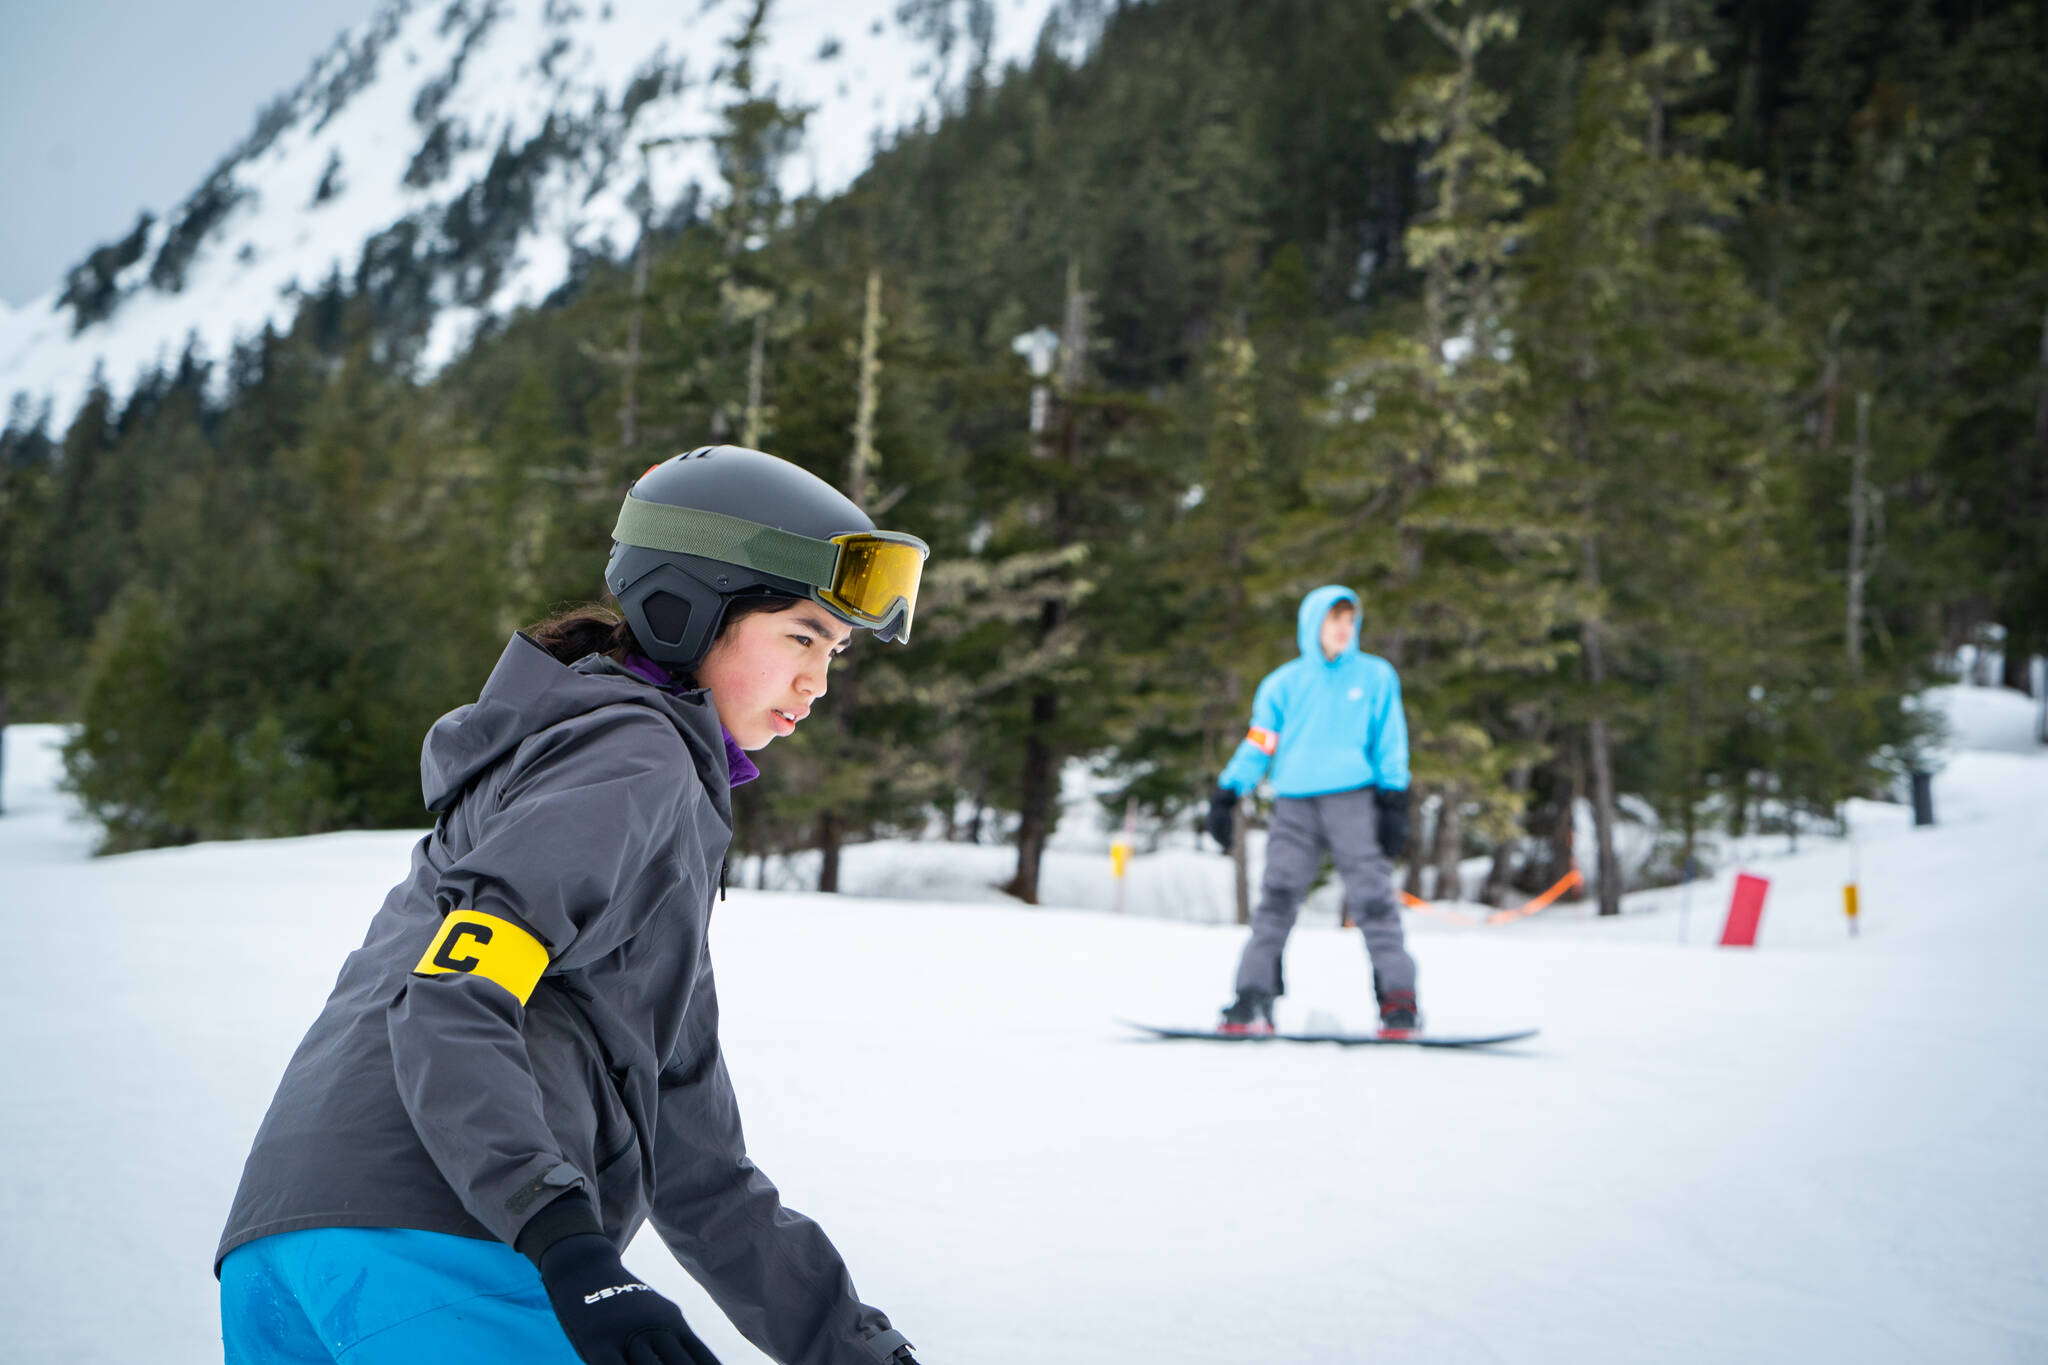 Photos by Lee House / Sitka Conservation Society
Aliyah Merculief focuses on her run while snowboarding at Snow Camp.